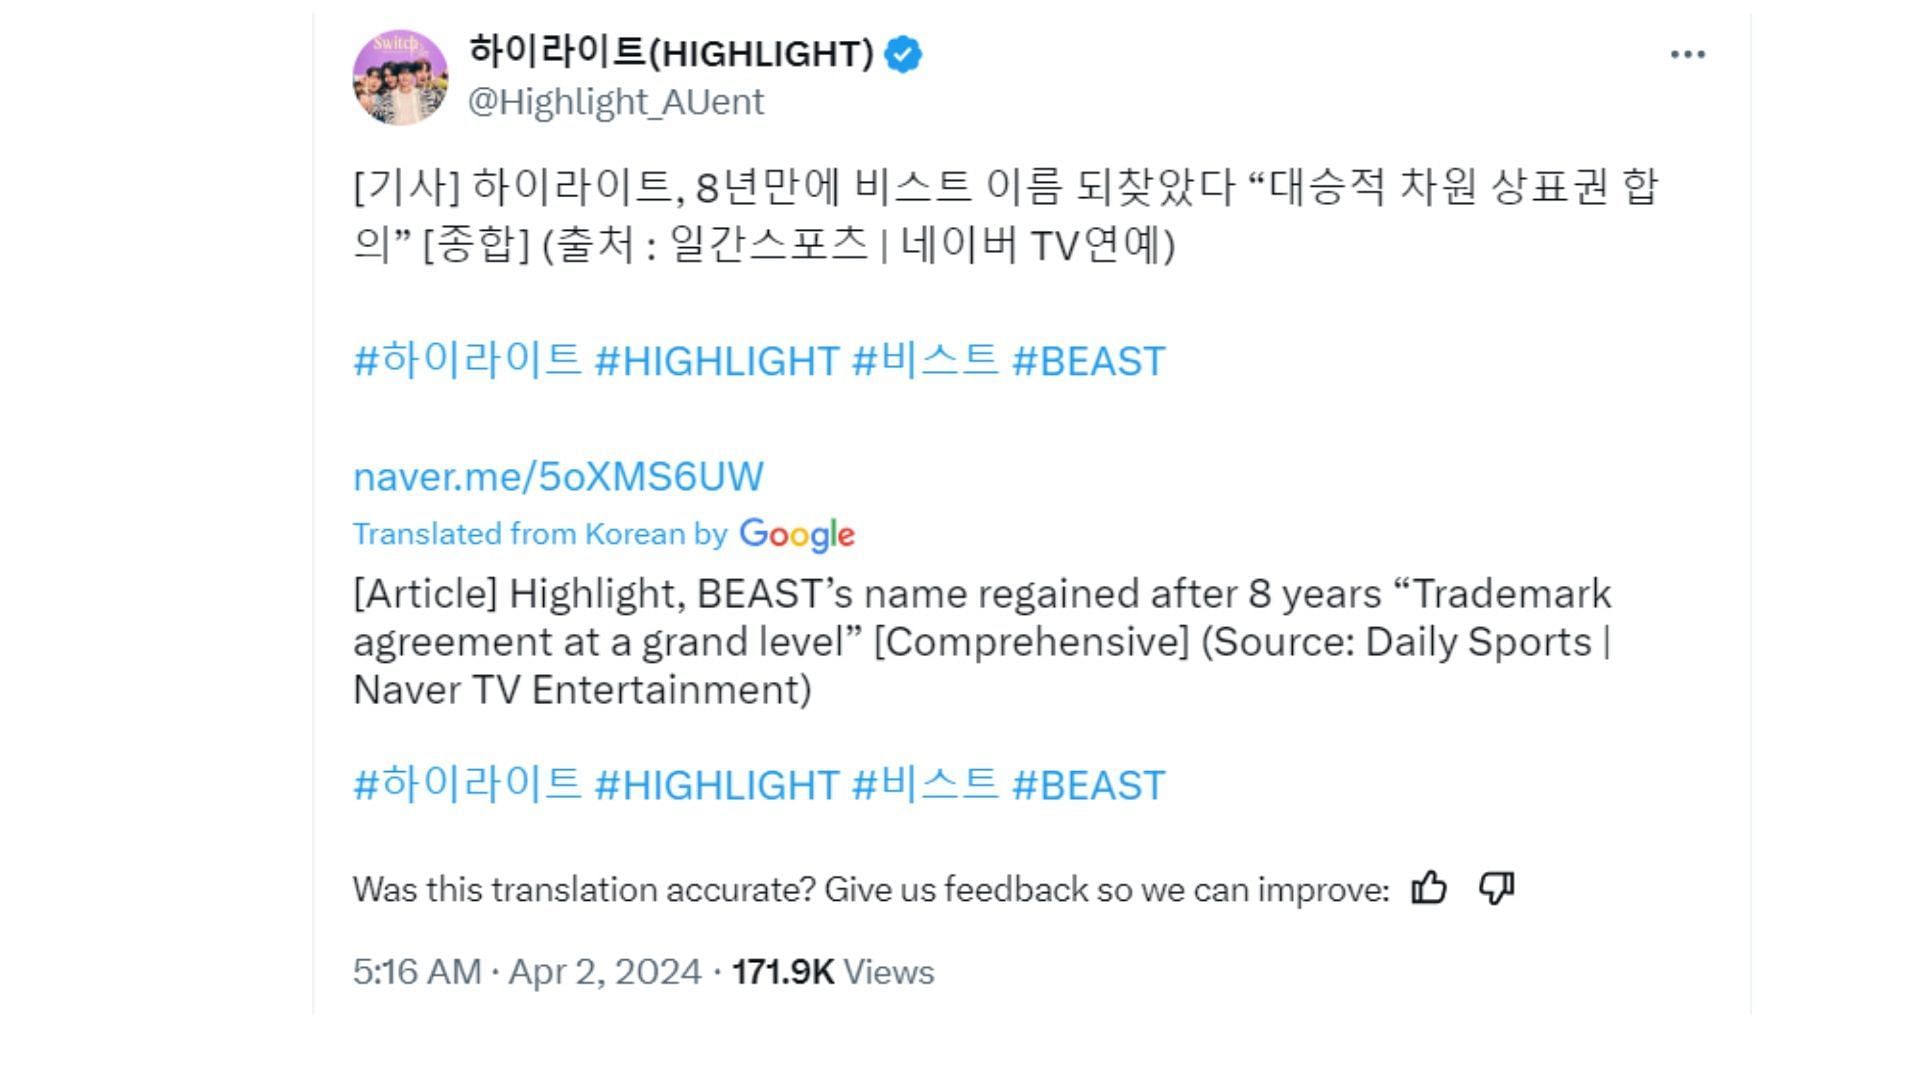 Announcement about BEAST trademark. (Image via X/ @@Highlight_AUent) 